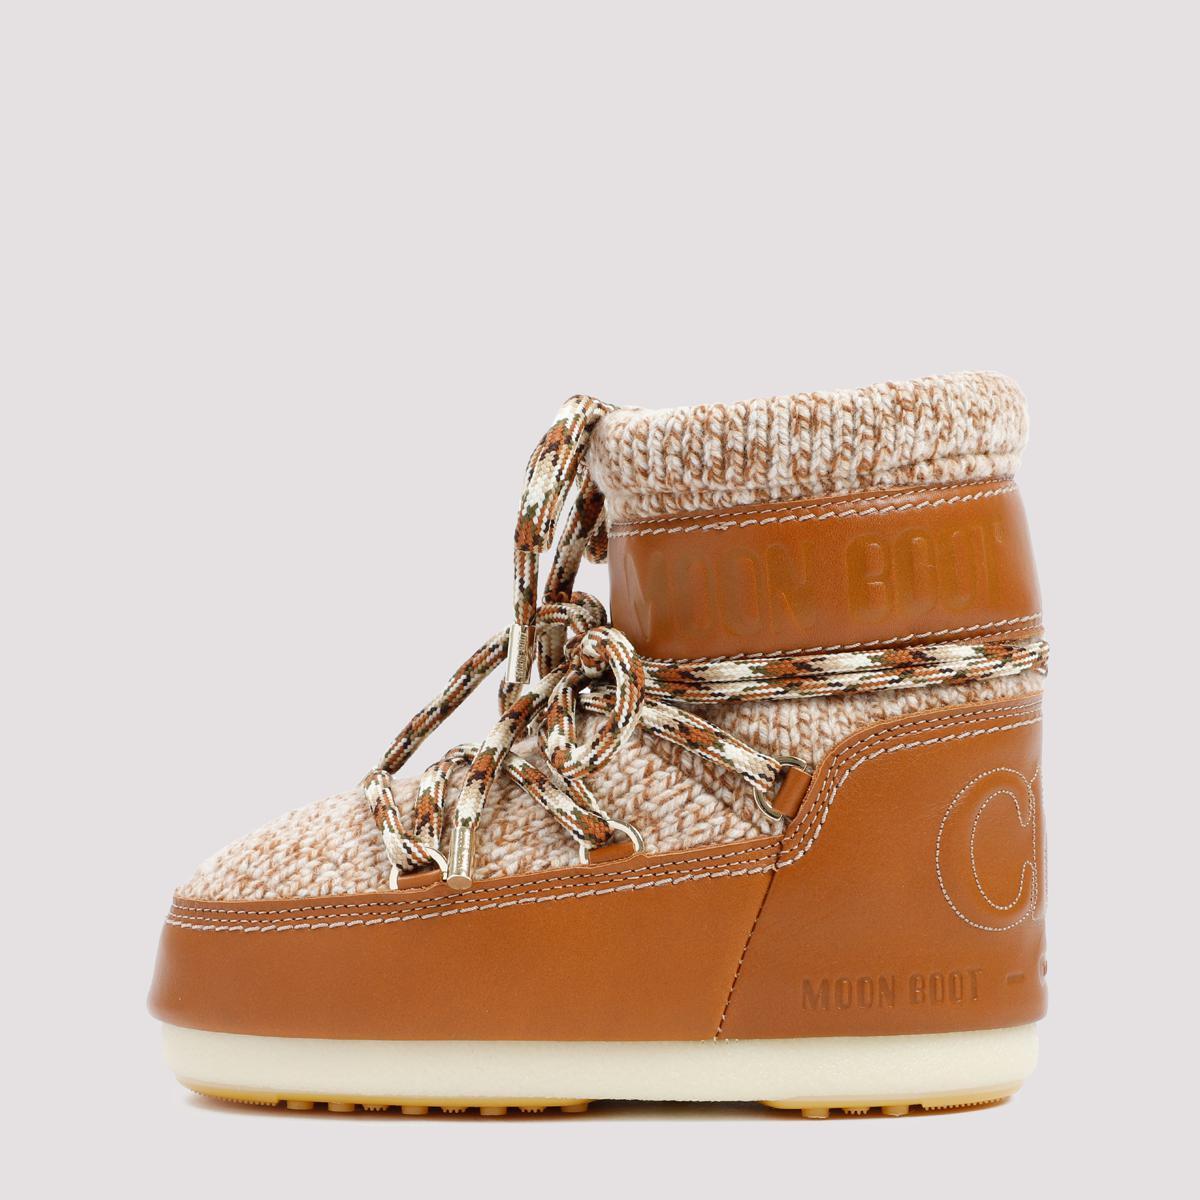 Chloé X Moon Boot Winter Boots Shoes in Brown | Lyst